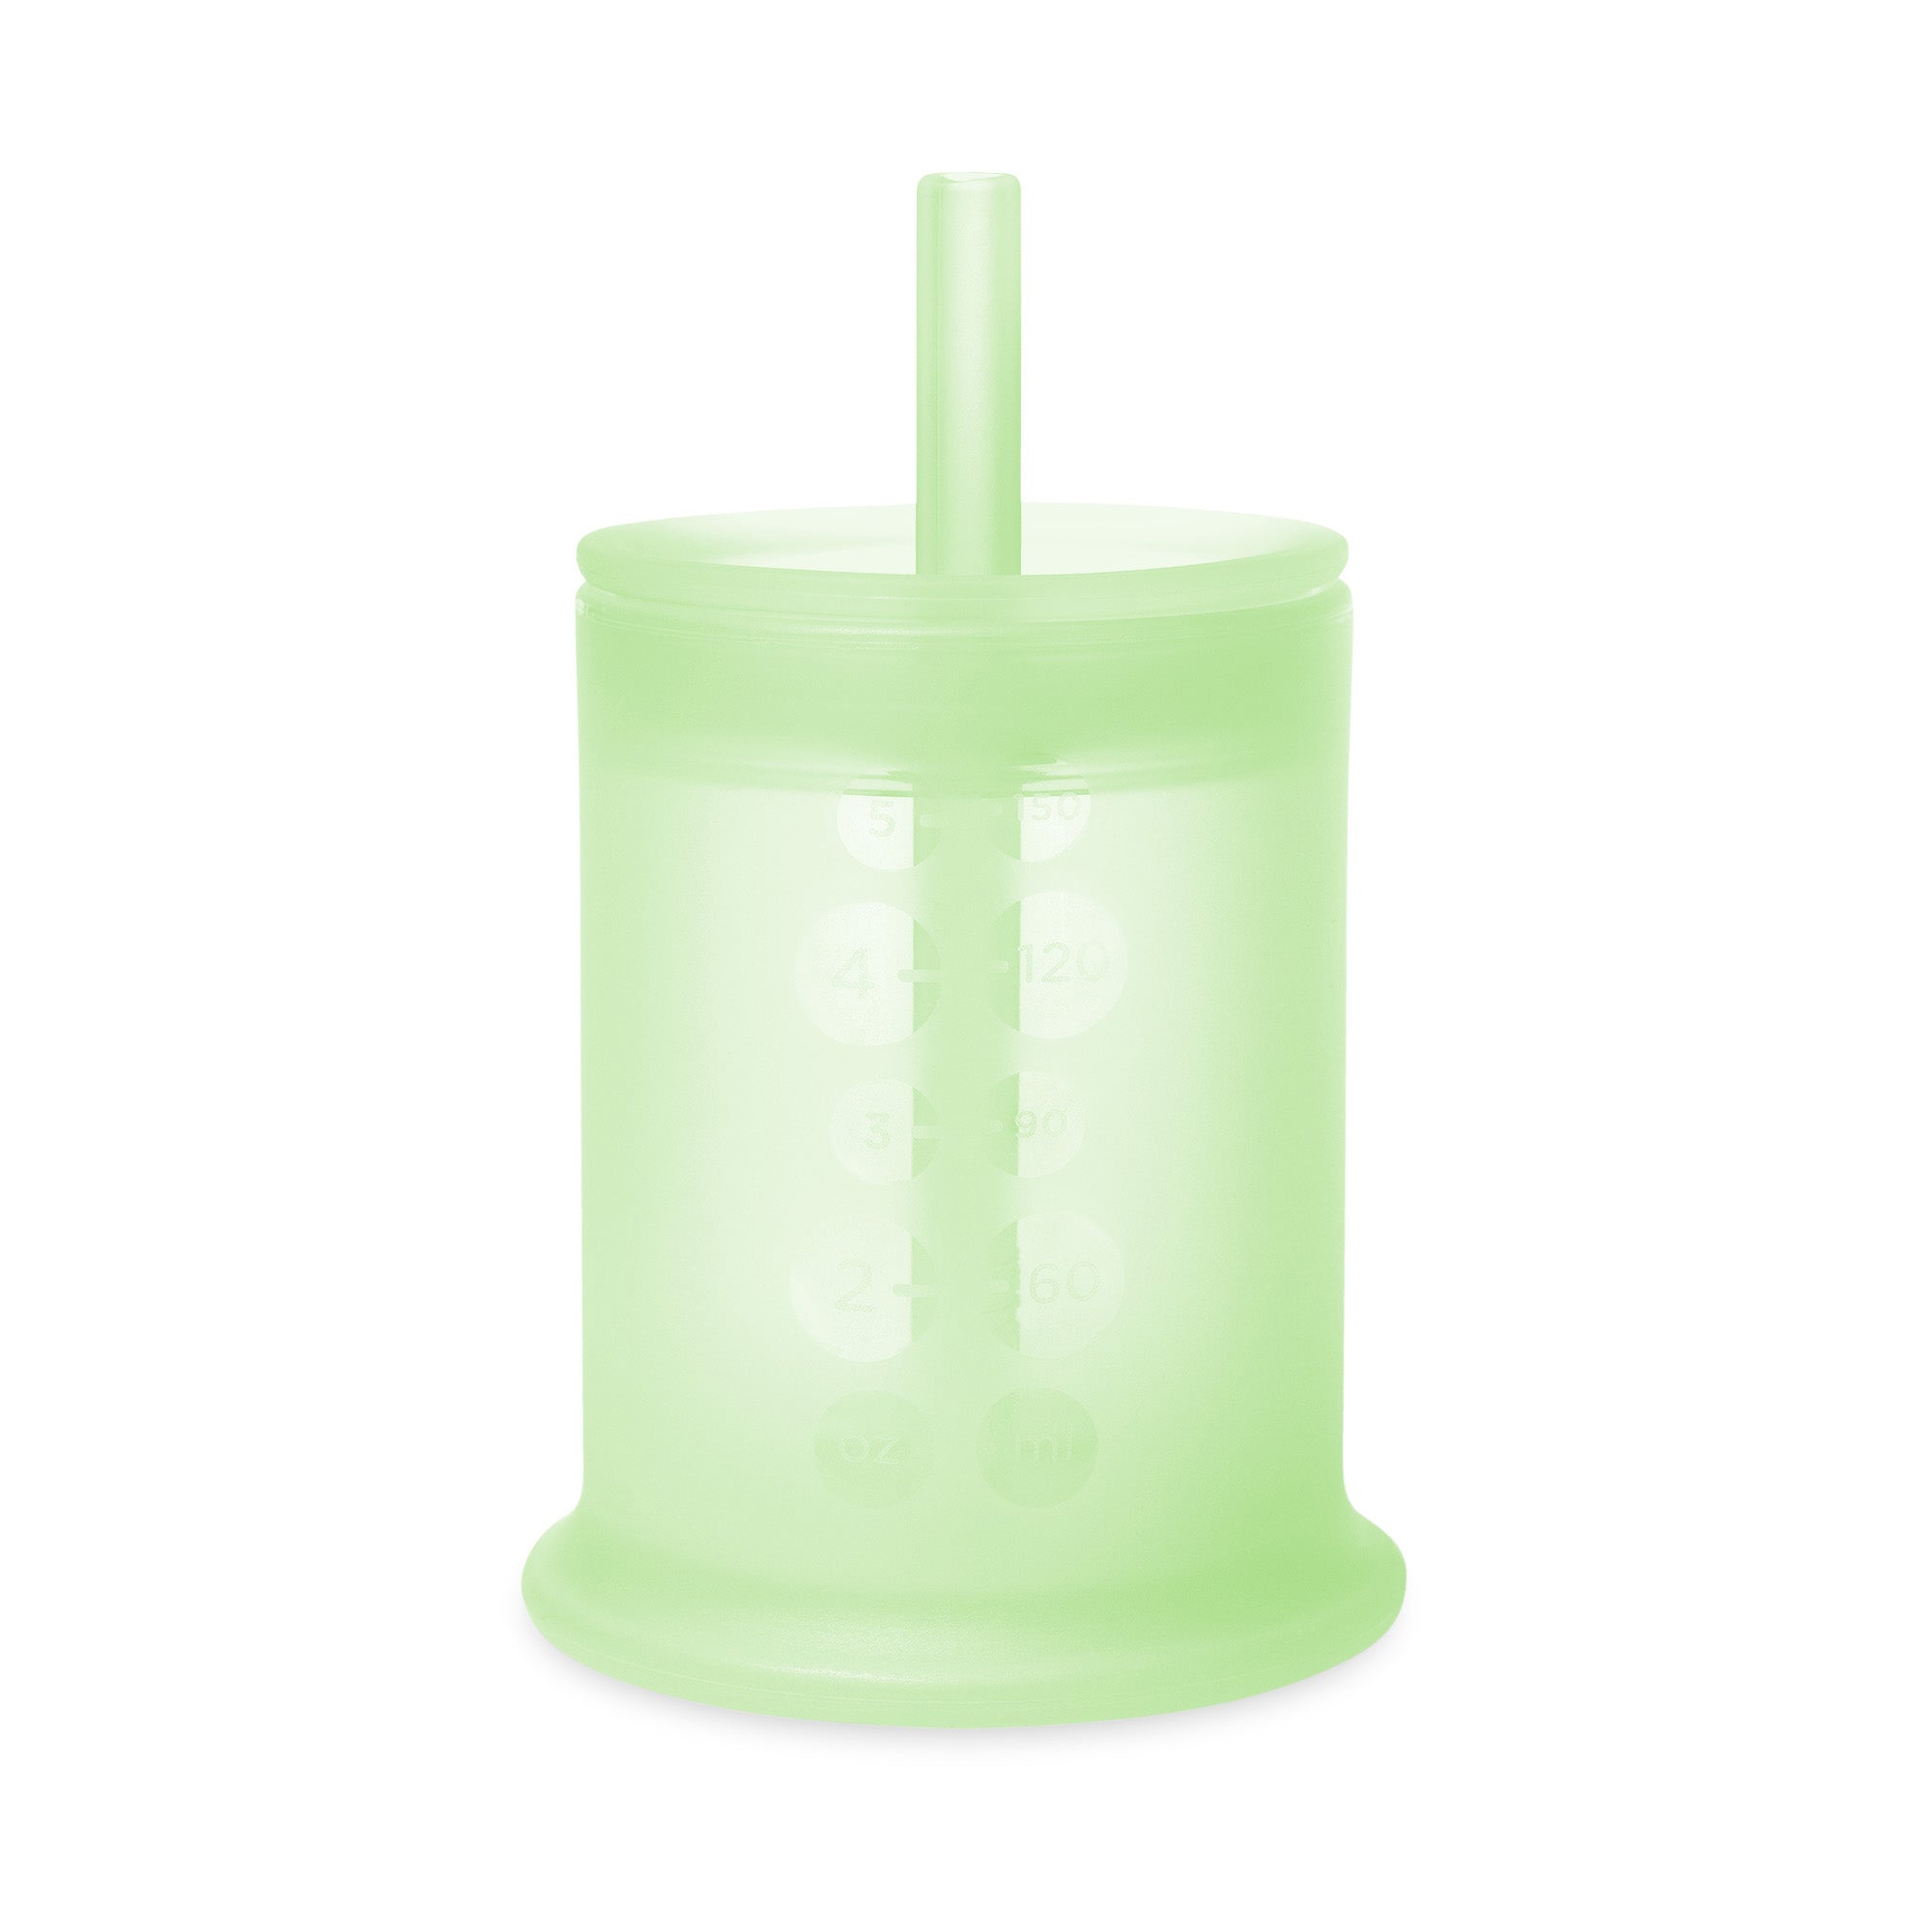 Toddler Cups Silicone Training Cup For Infants And Toddlers Kids